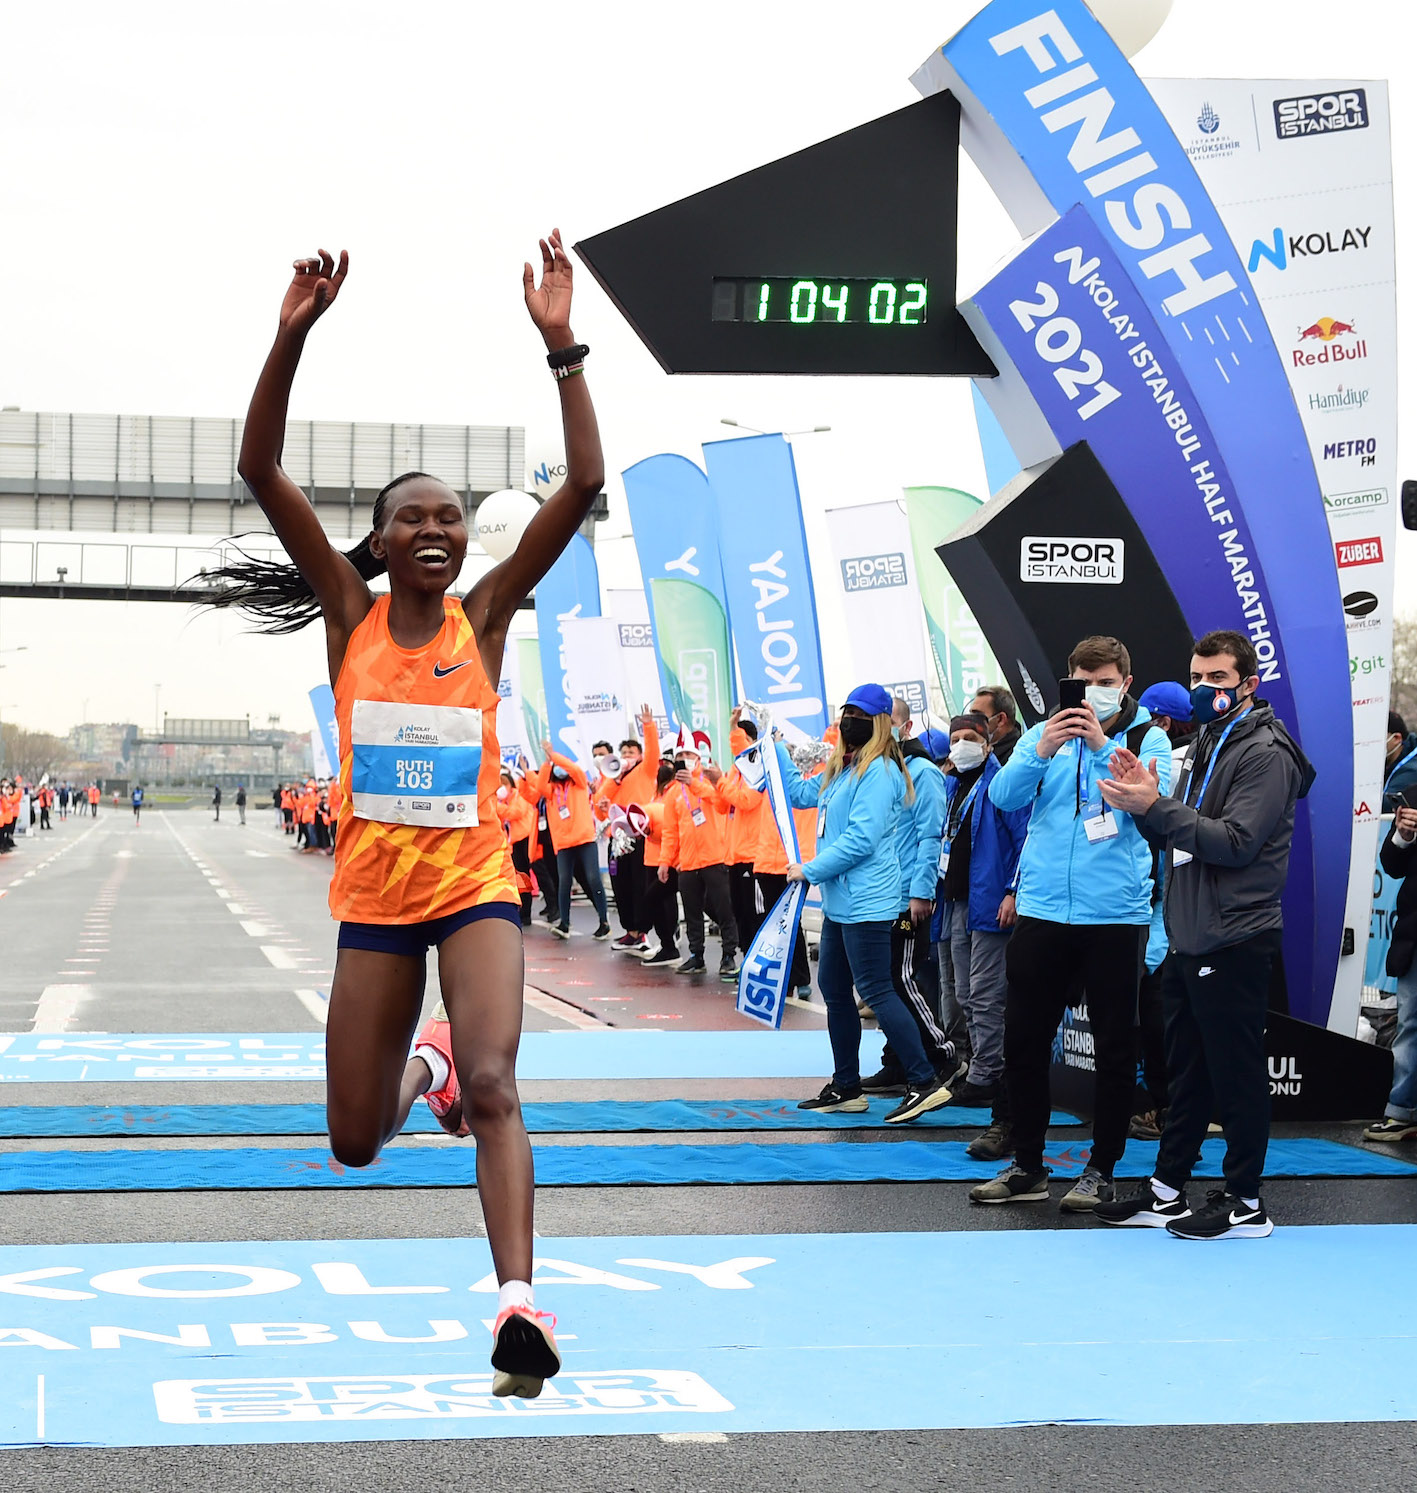 Ruth Chepngetich breaking the world record in Istanbul in 2021 / Photo credit: Spor Istanbul